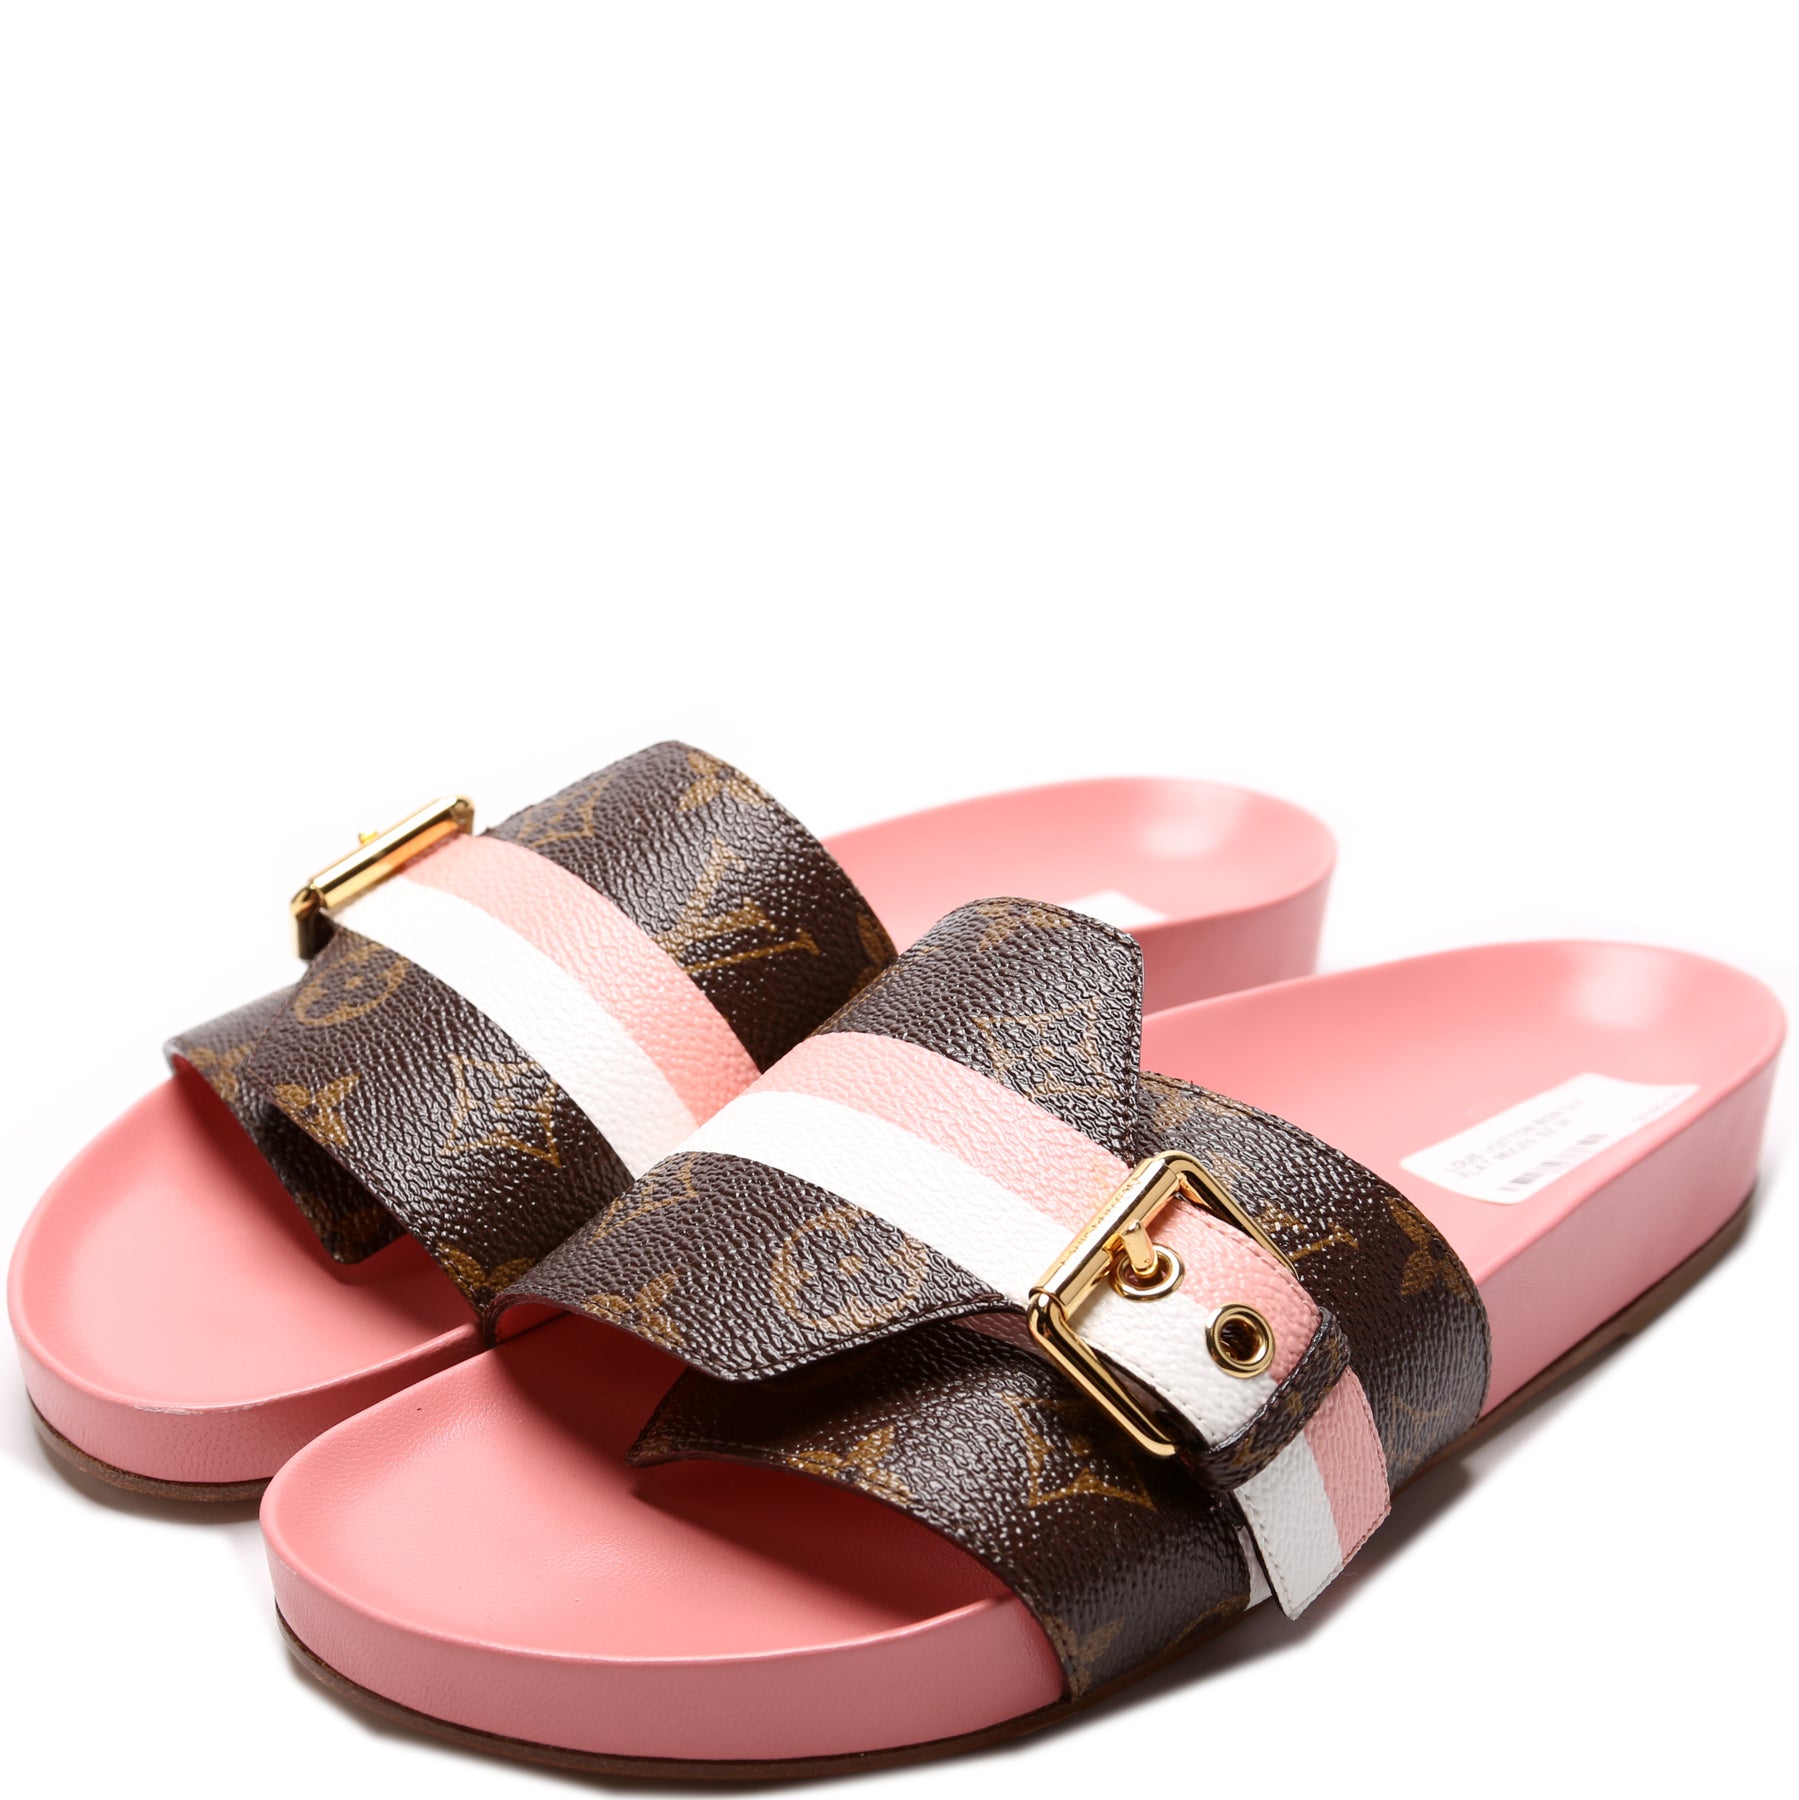 Louis Vuitton - Authenticated Bom Dia Sandal - Cloth Pink For Woman, Very Good condition